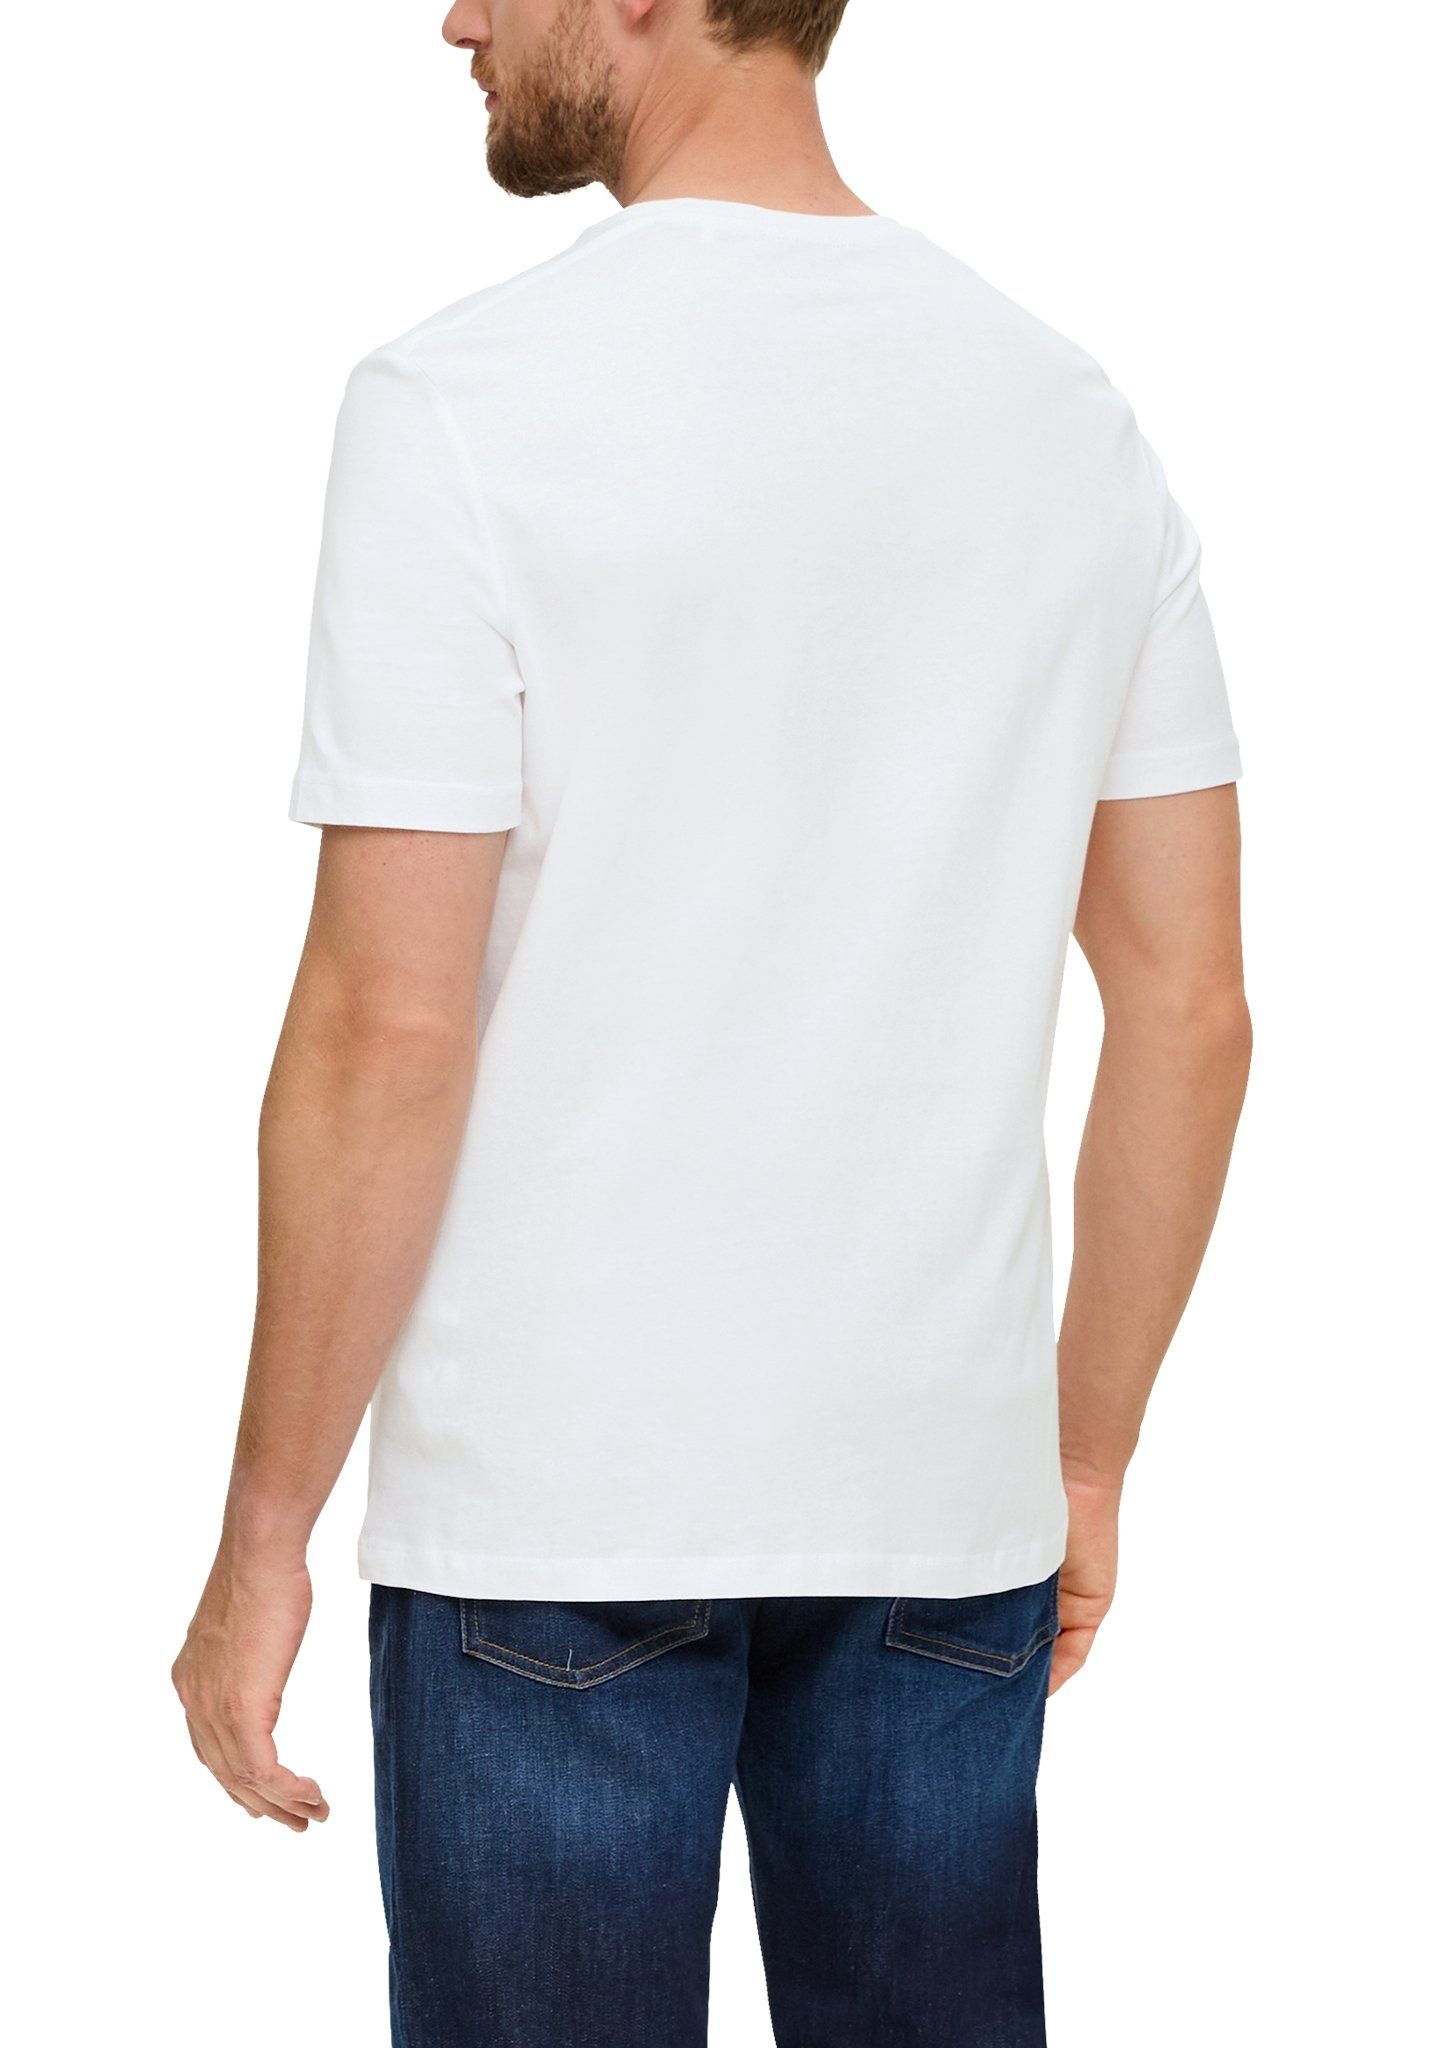 s.Oliver T-Shirt im white sportiven Look